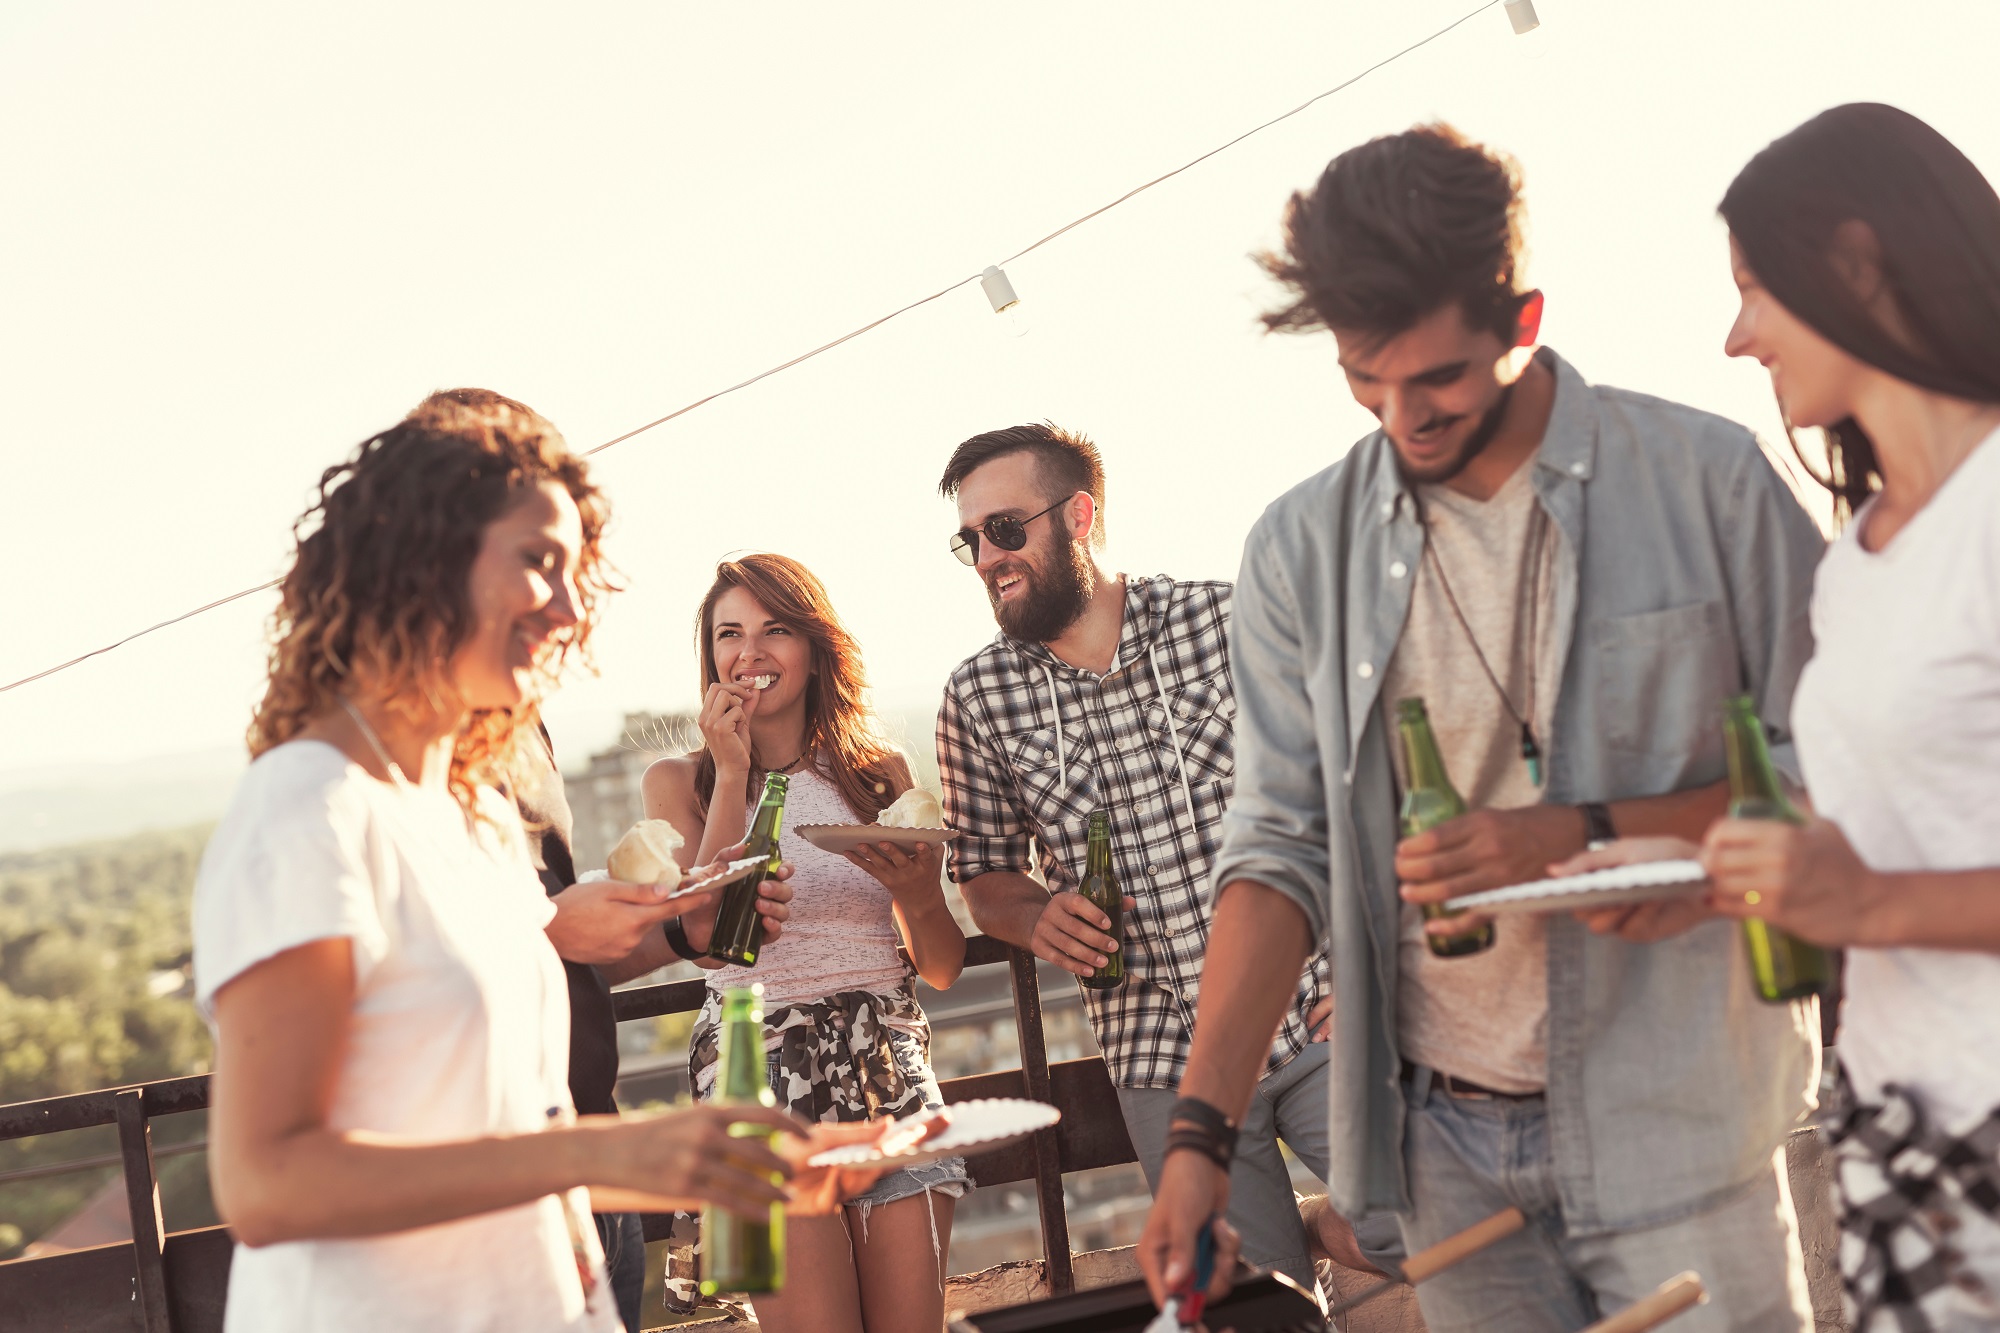 Group of people drinking beer and enjoying food on rooftop